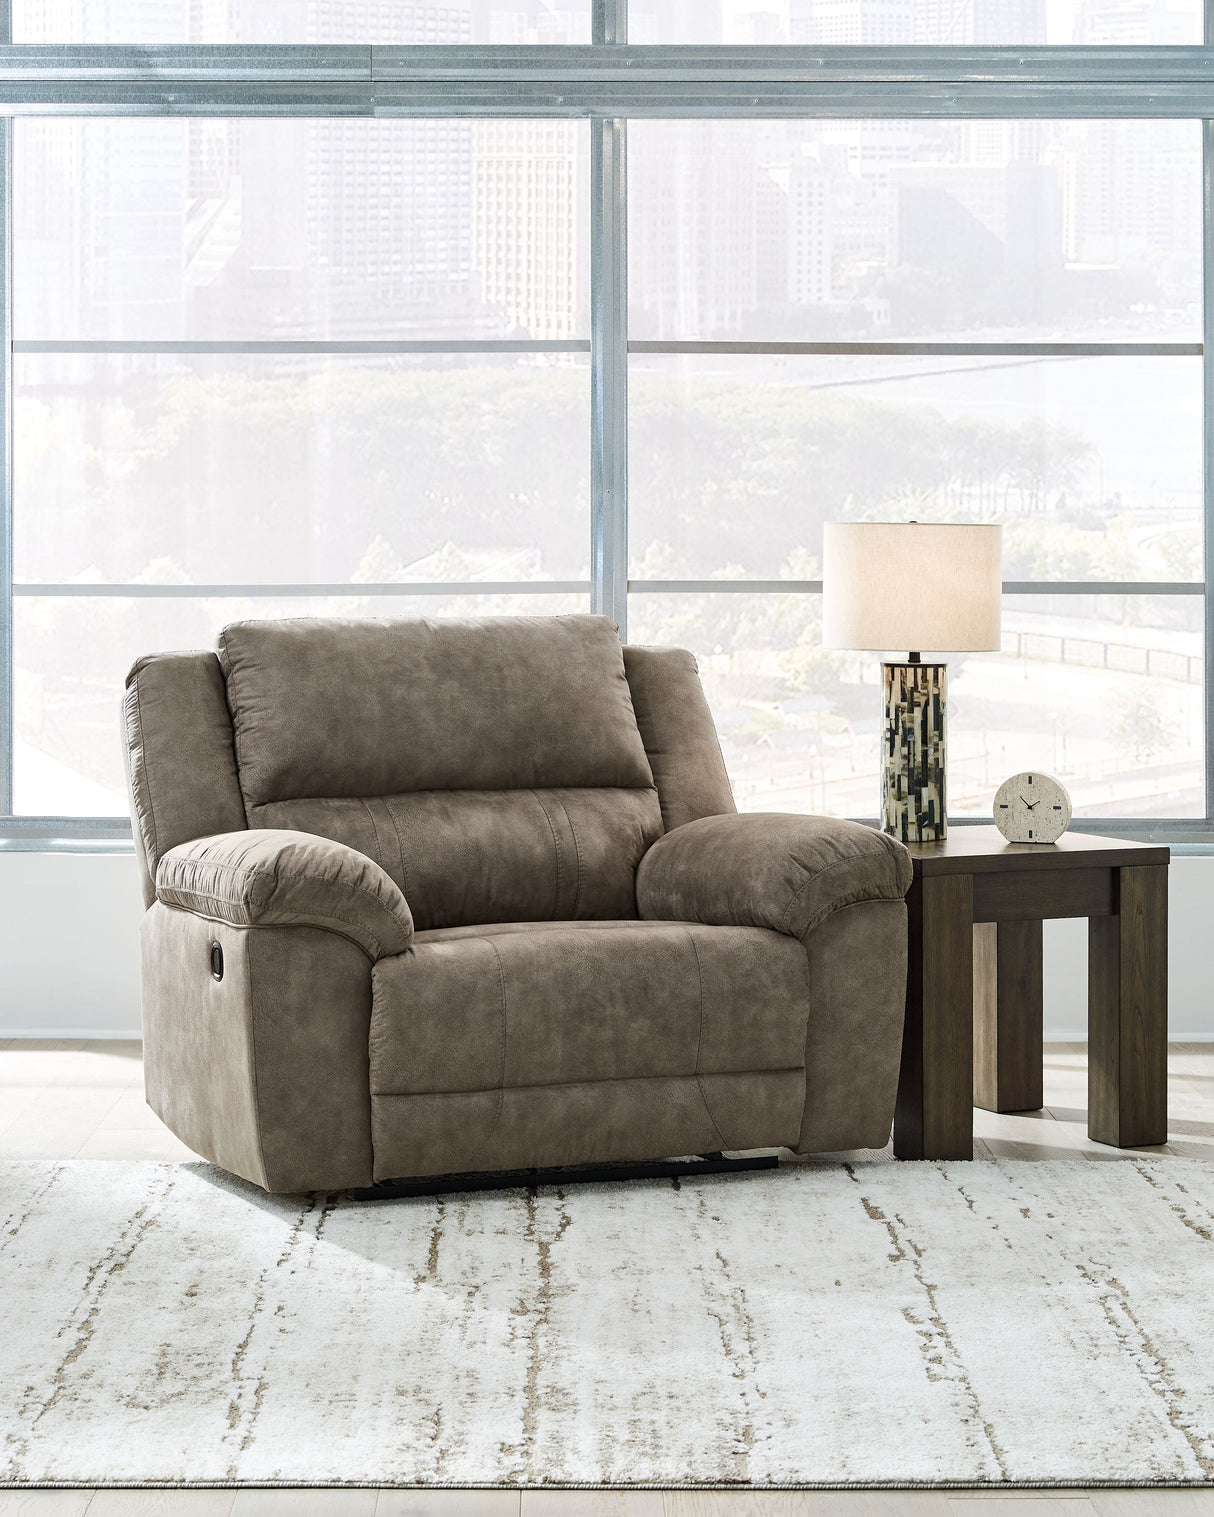 Laresview - Fossil - Zero Wall Wide Seat Recliner